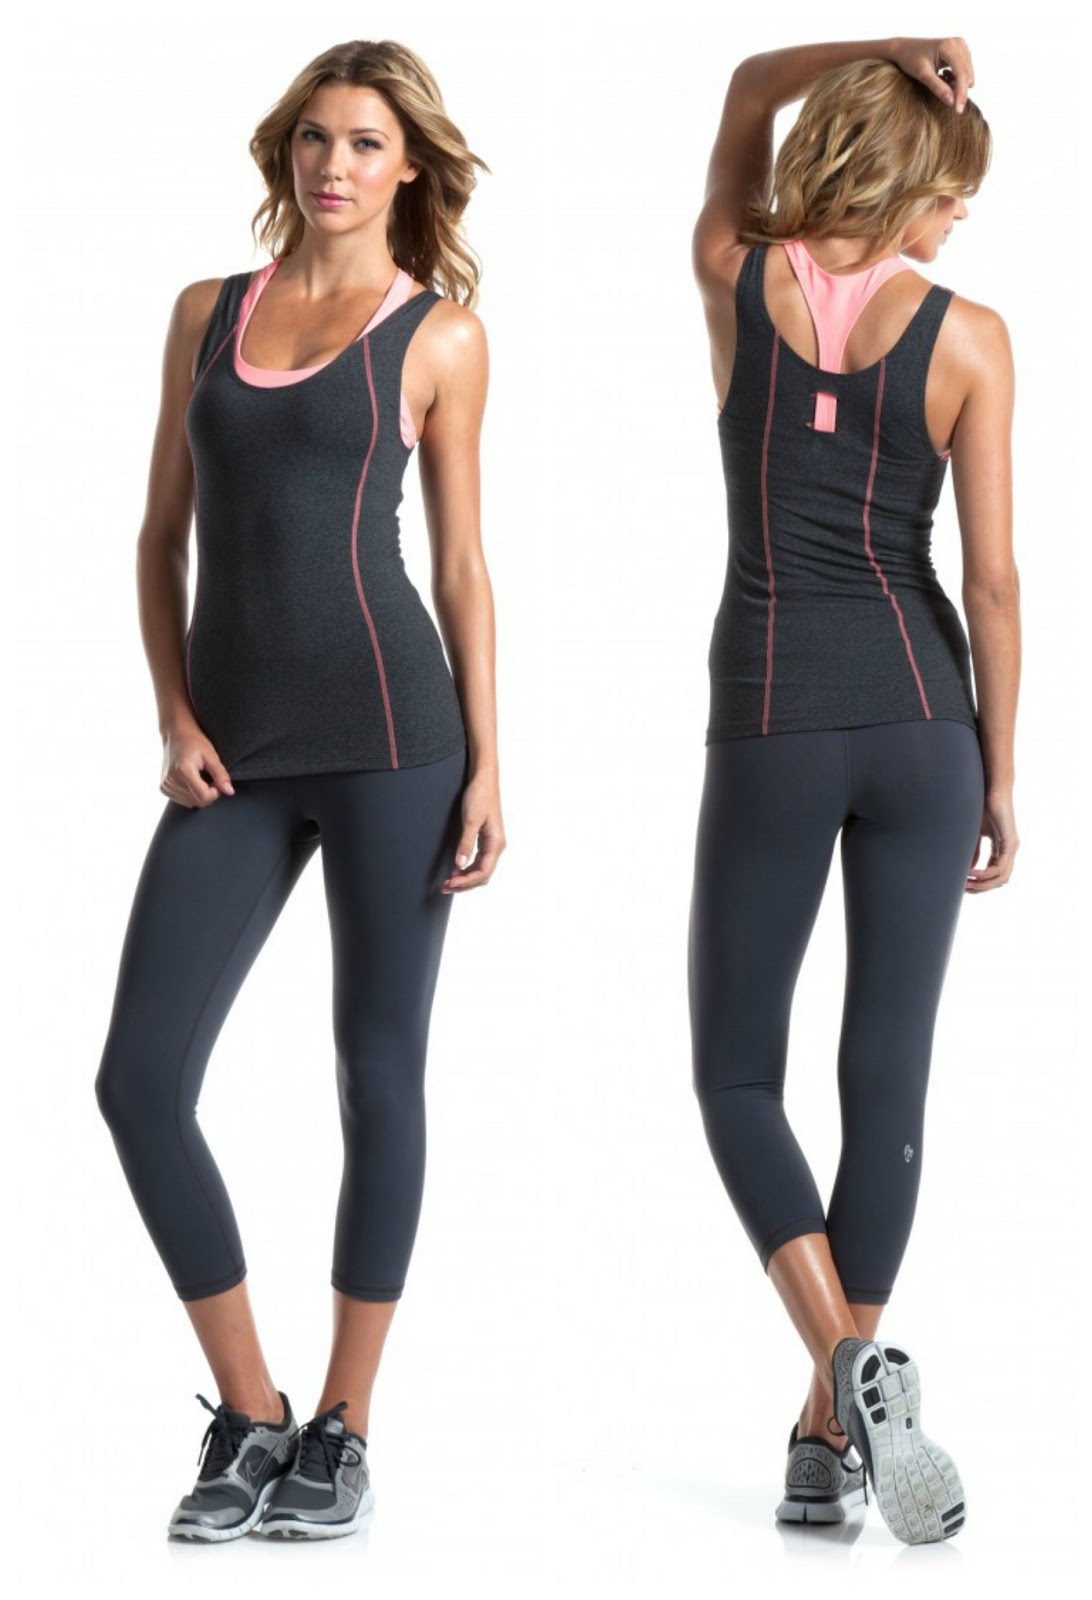 6 Day Images of workout clothes for Gym